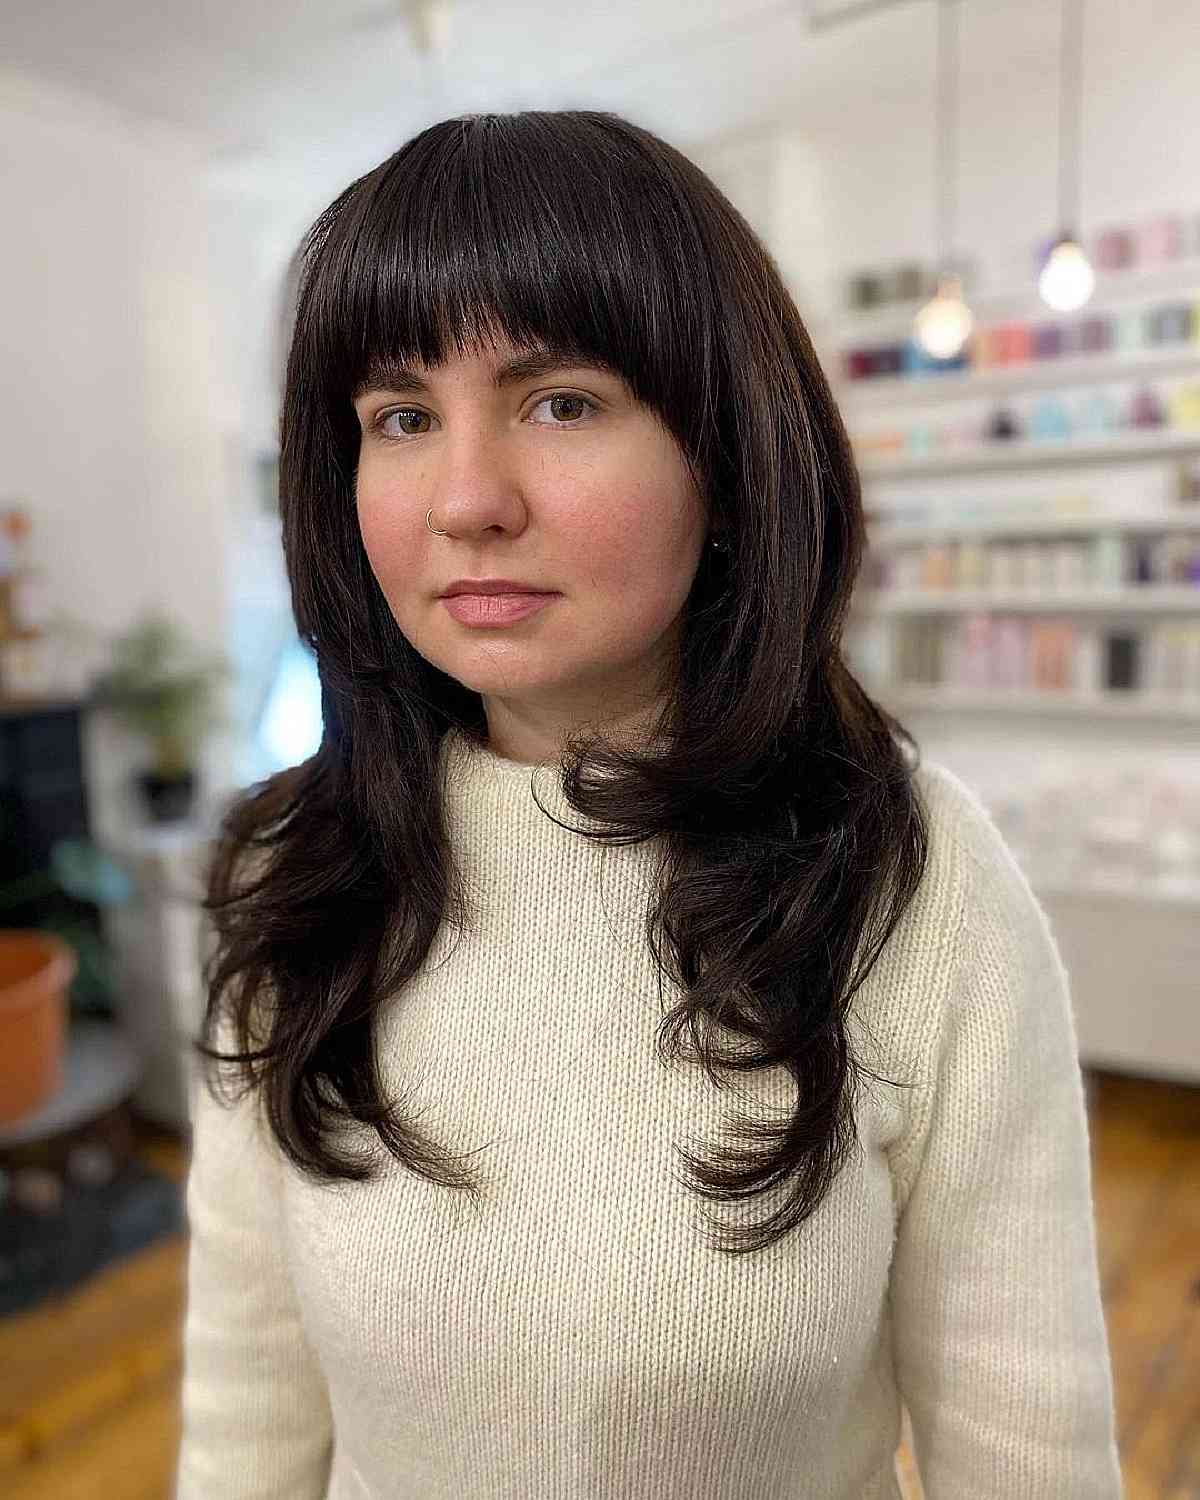 Best Bangs for Round Faces: Heavy Bangs